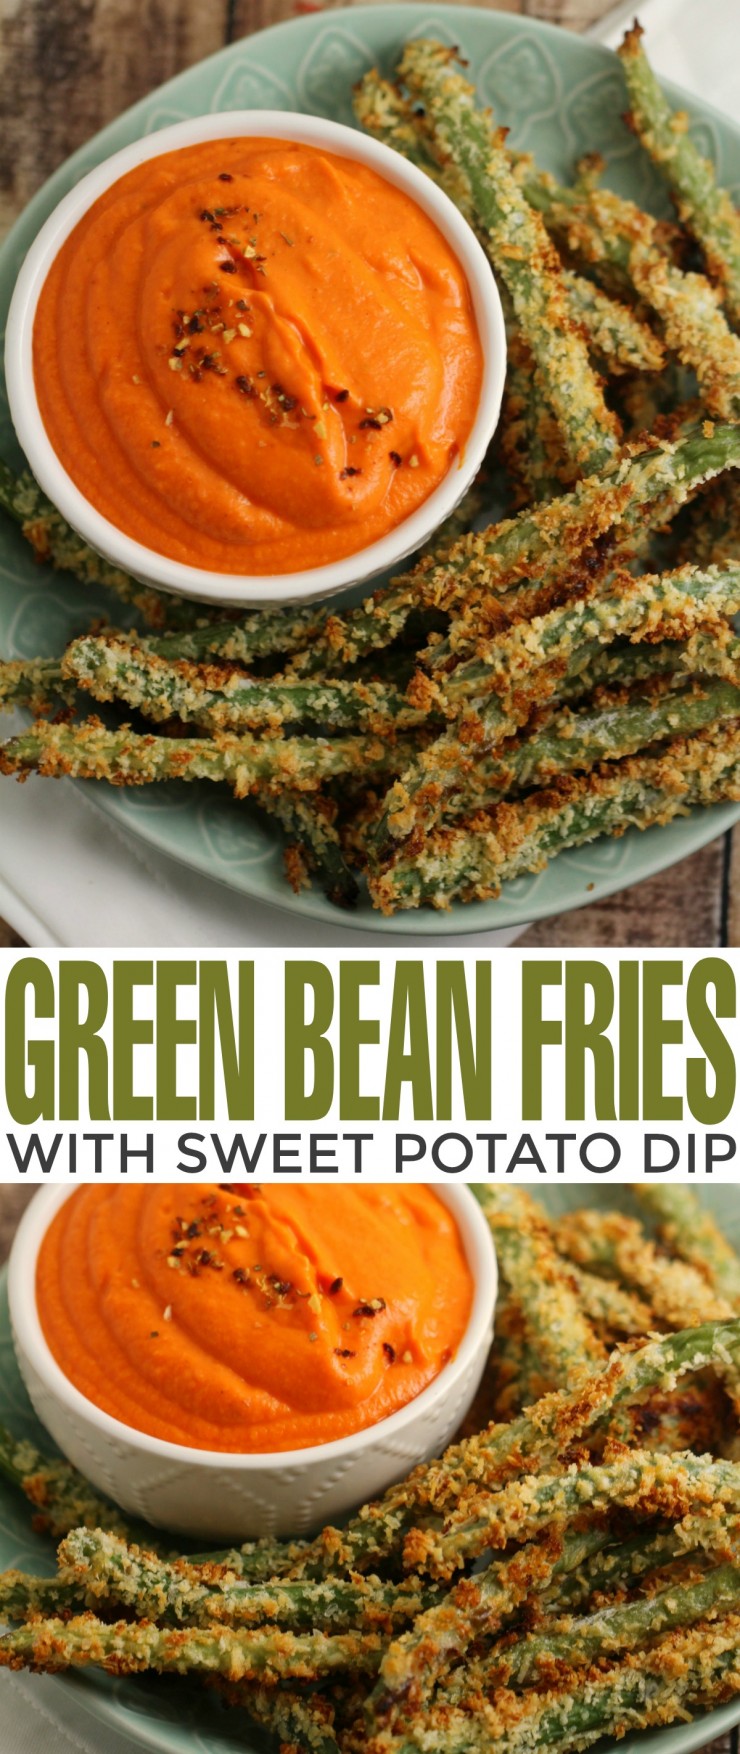 These crispy Green Bean Fries pair wonderfully with this nutritious Sweet Potato Dip for an after-school snack kids will be unable to resist. These are also great as an appetizer! 